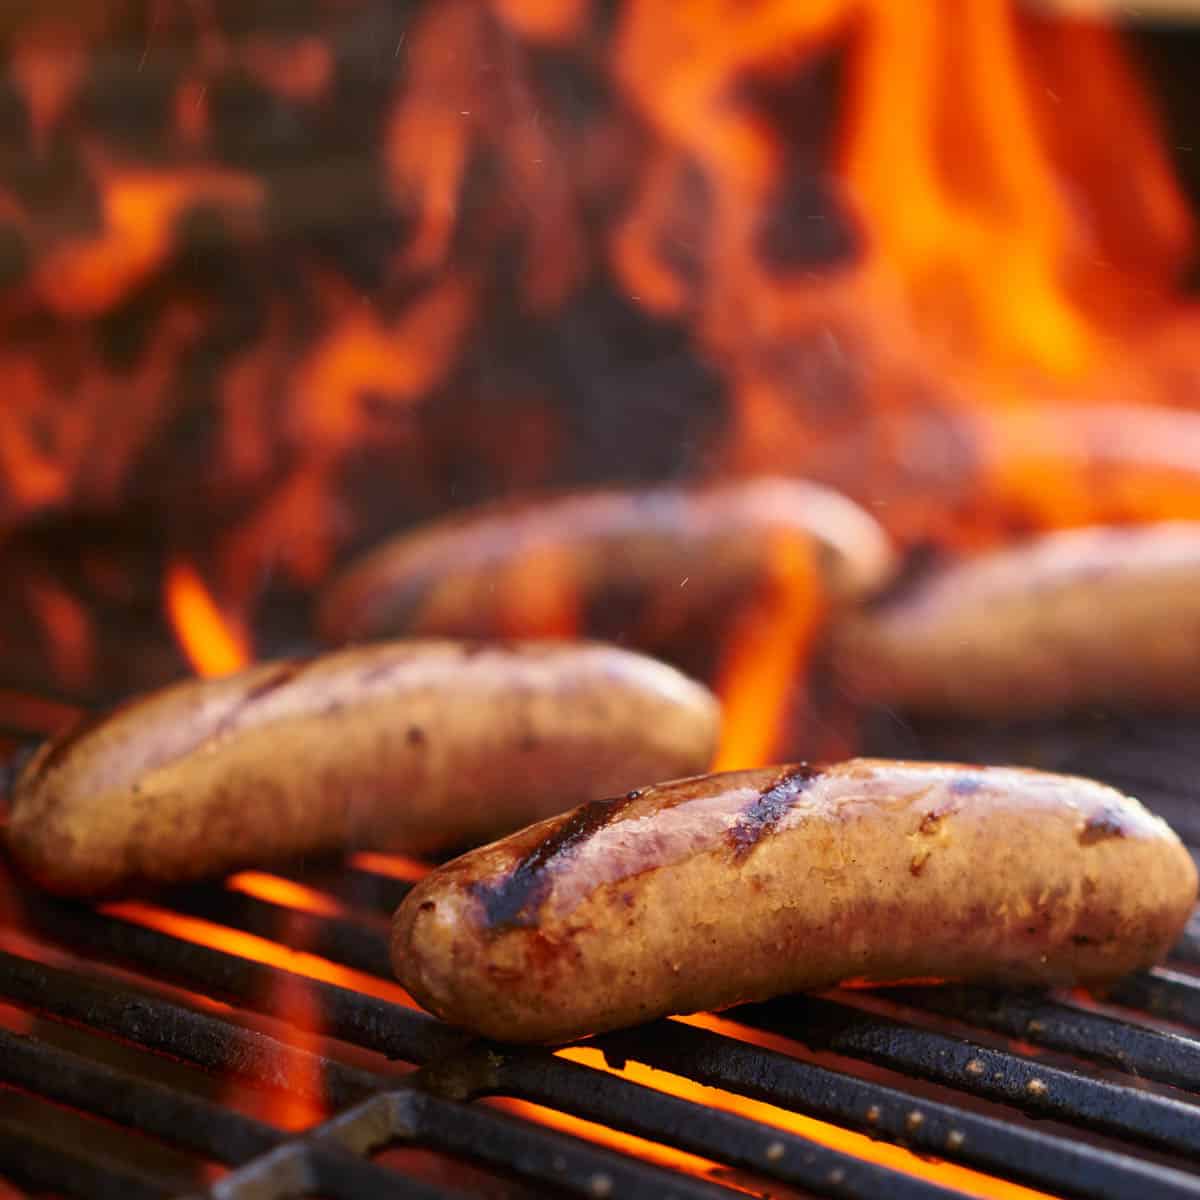 Brats on the grill with flames.